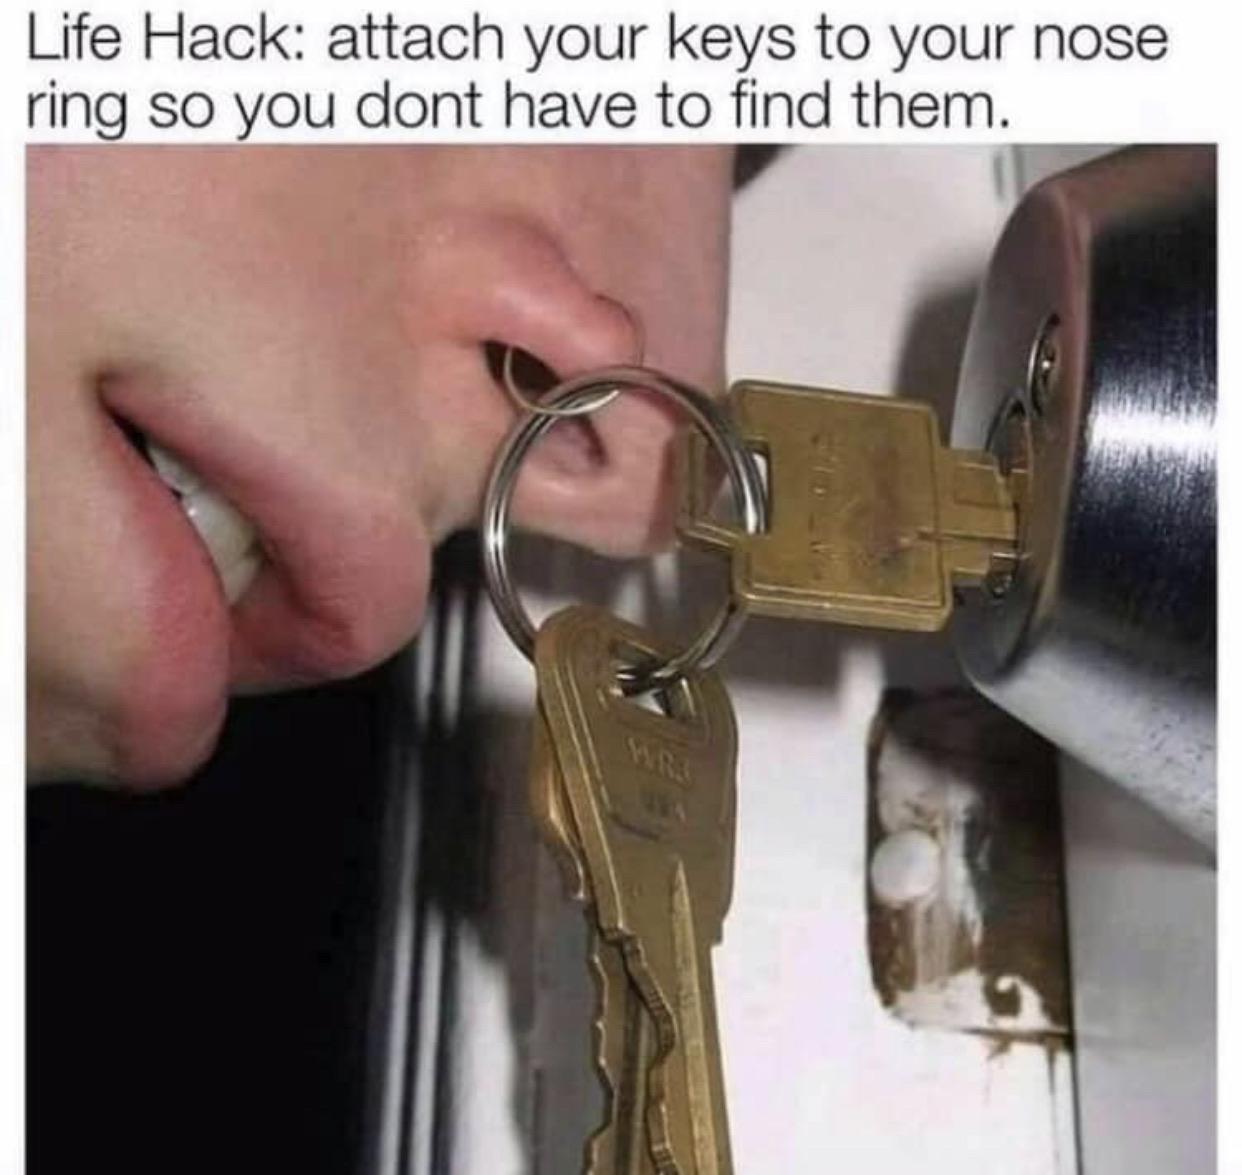 nose ring funny - Life Hack attach your keys to your nose ring so you dont have to find them.